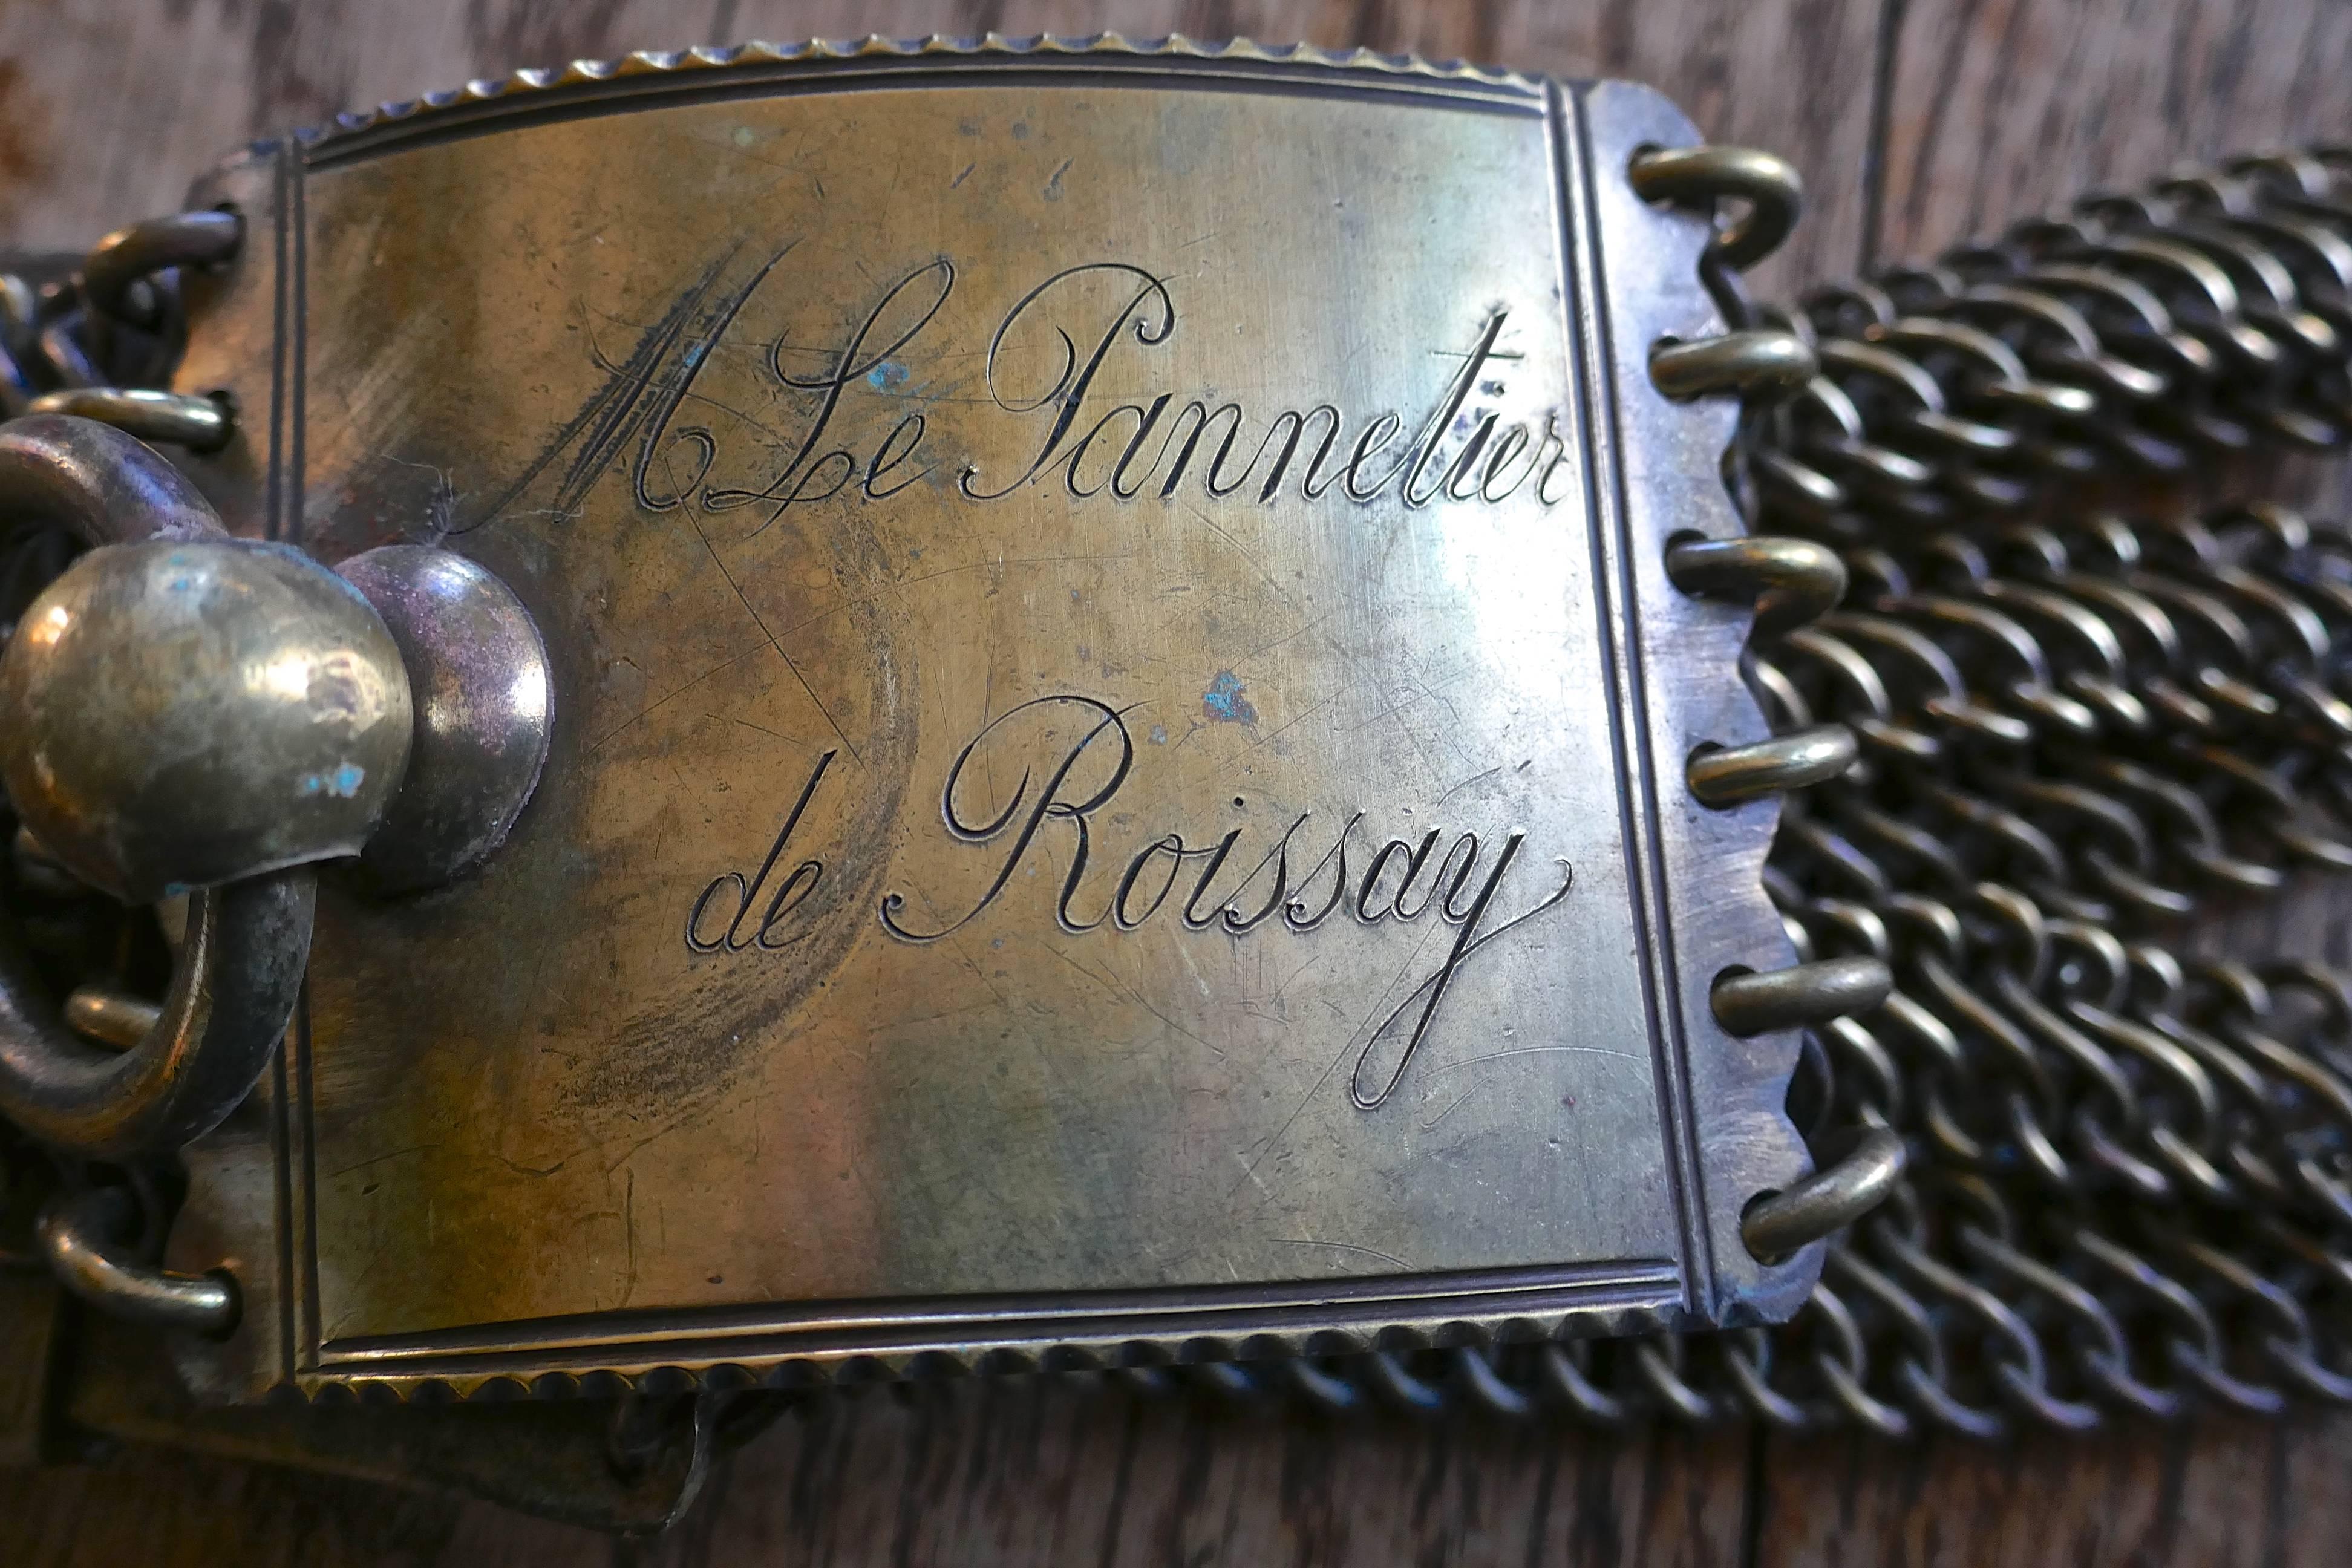 18th century, French bronze hunting dog collar and comb

A late 18th century, French bronze hunting dog collar, the collar is Engraved giving the piece the necessary provenance to trace the history of the Chateau and the family from which it has